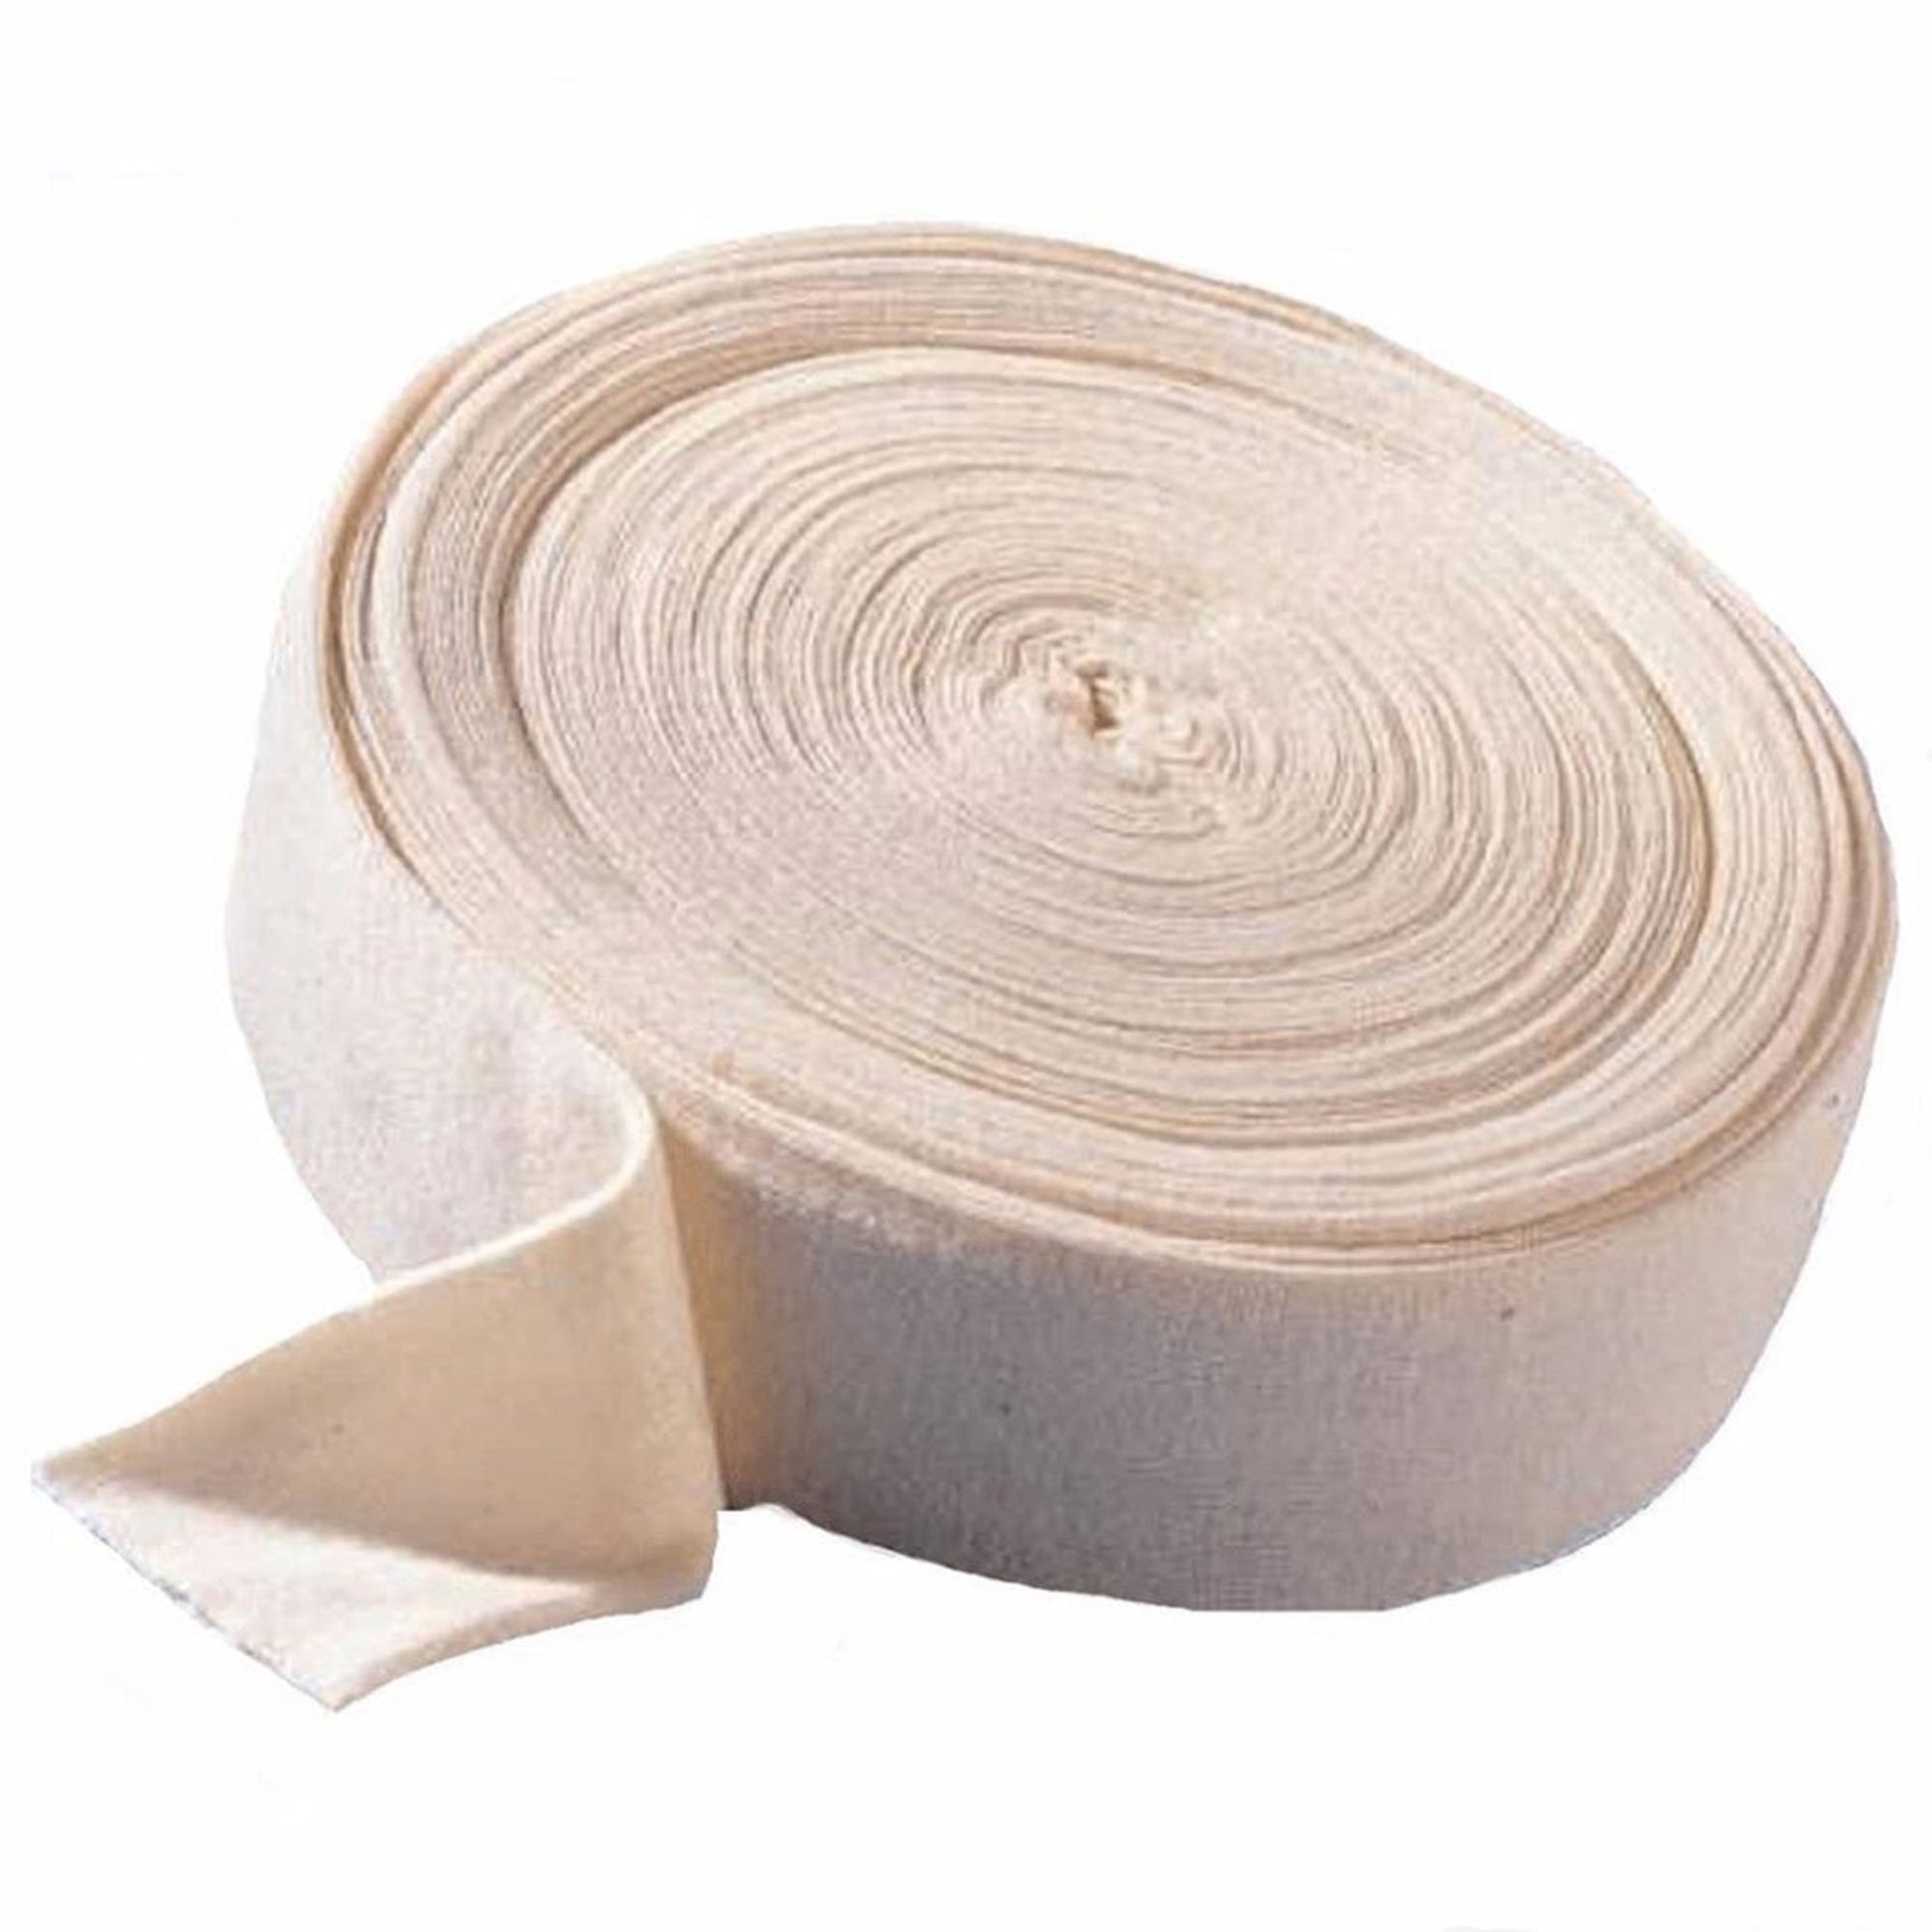 Albahealth® Off-White Cotton Tubular Stockinette, 4 Inch X 25 Yard, Sold As 1/Each Alba 81420